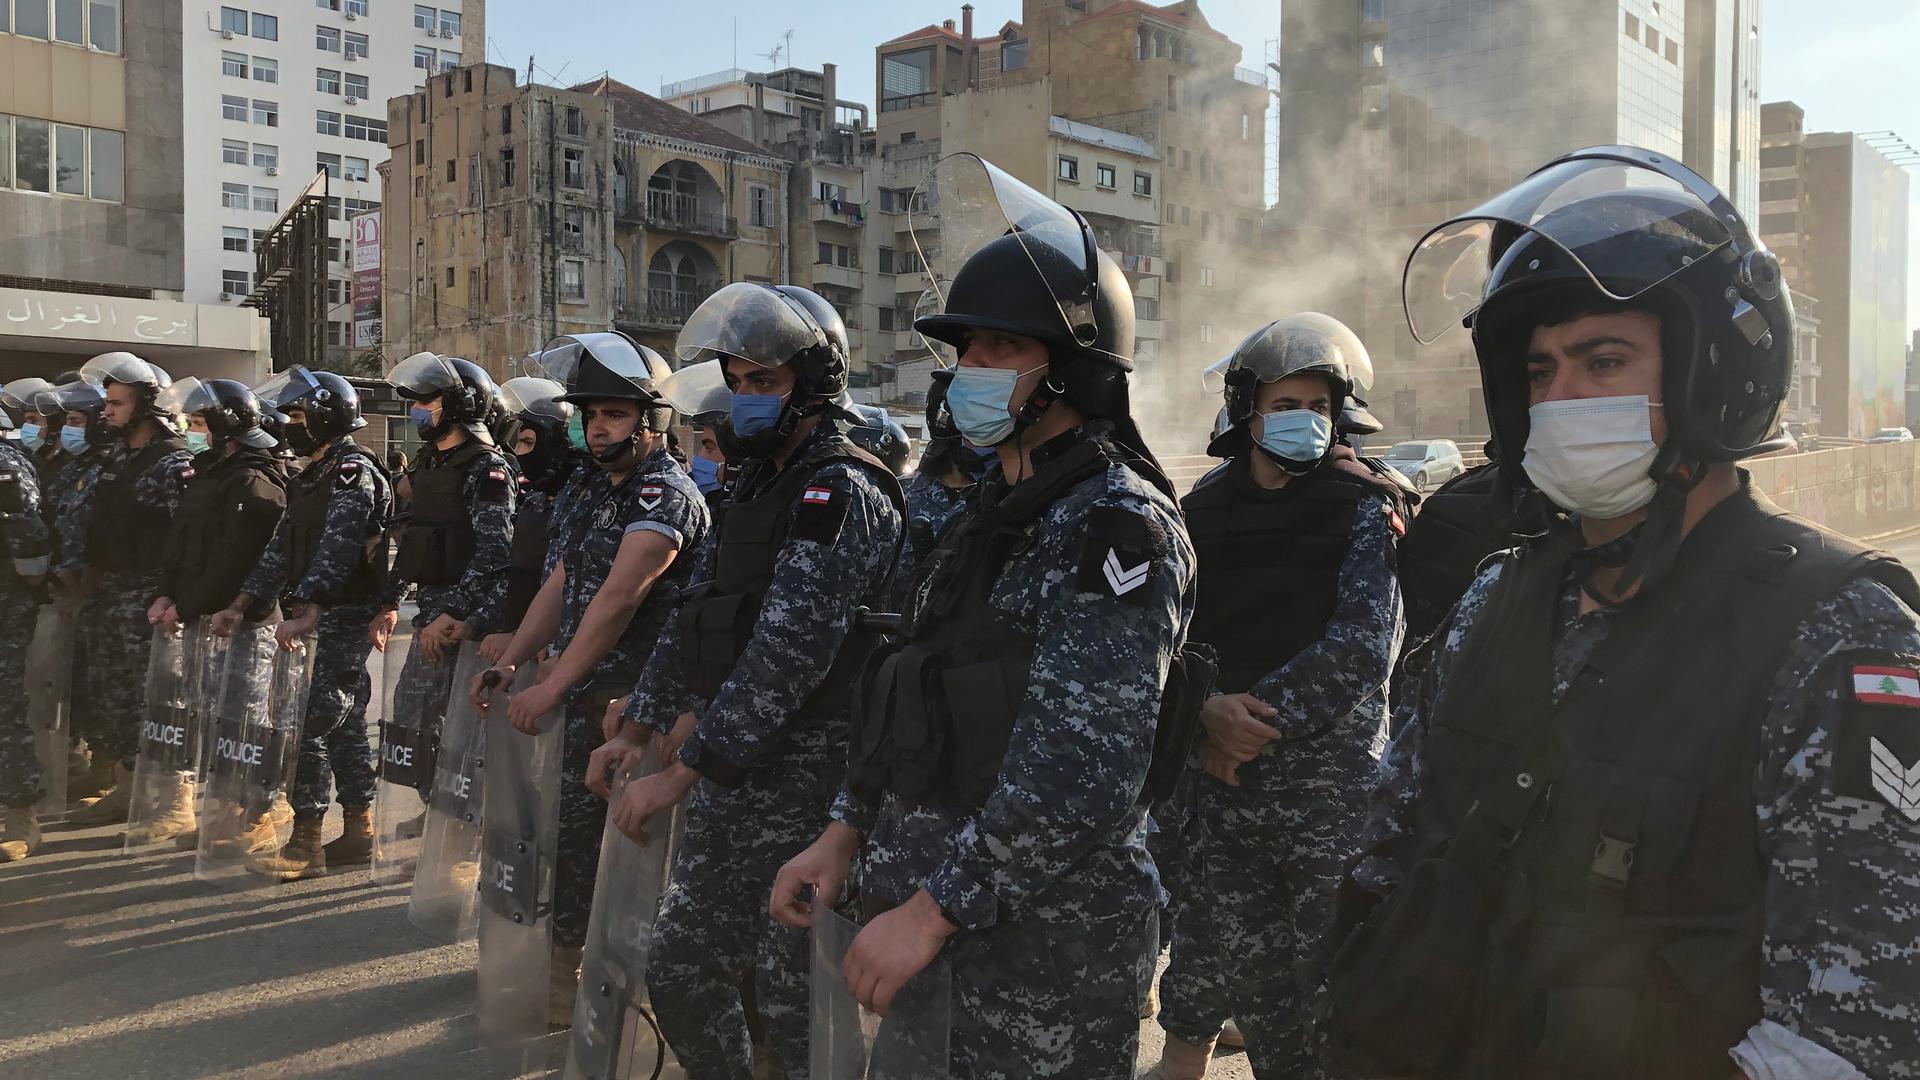 People in military uniform wear face masks while they form a line on a Beirut street during protest. 